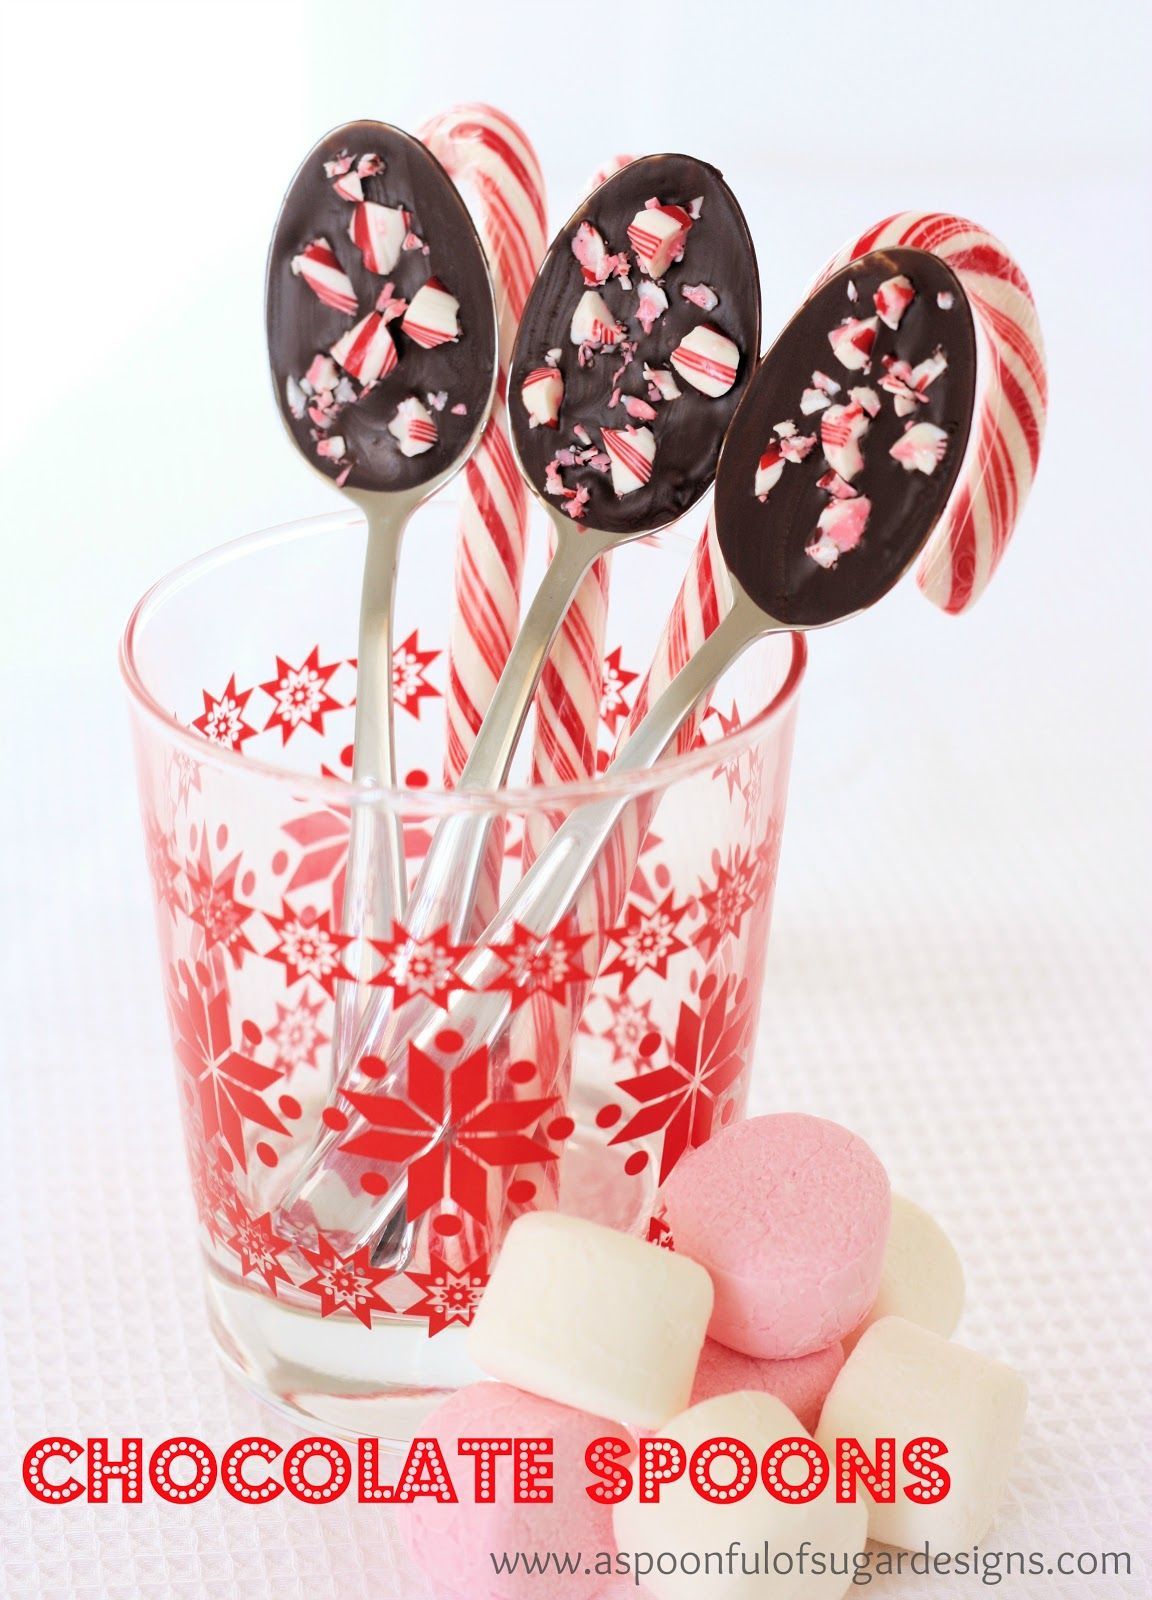 These delicious little chocolate spoons from @A Spoonful of Sugar would make the